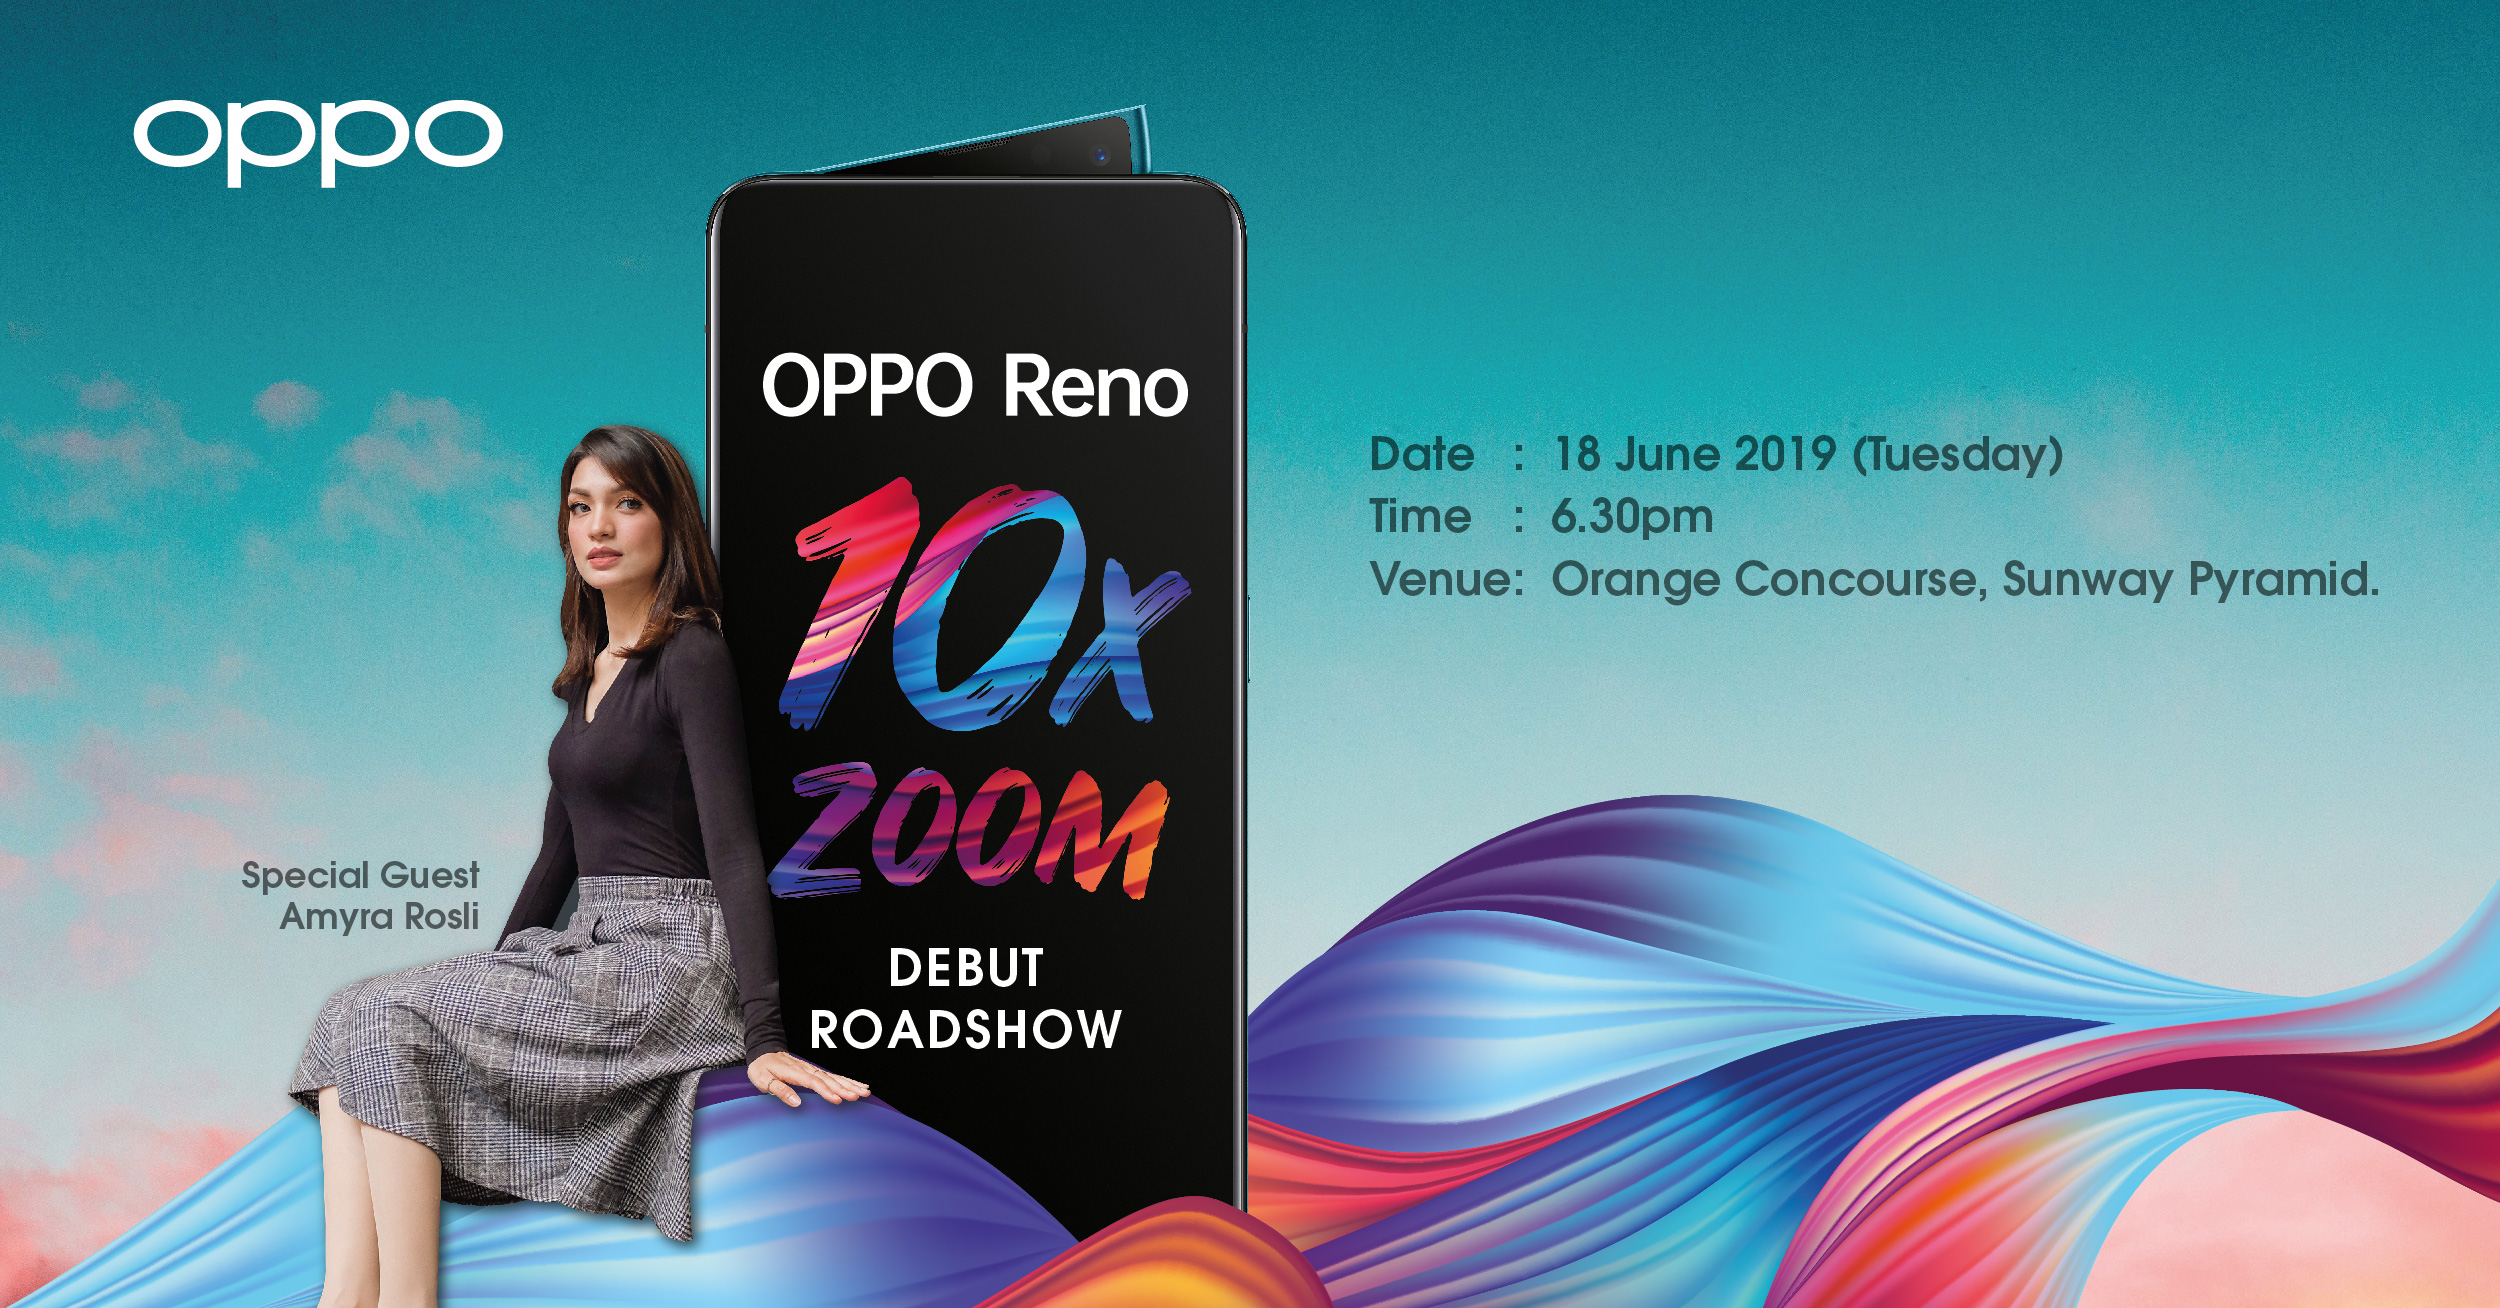 The OPPO Reno 10x Zoom Debut Roadshow Comes to Town on 18th June at Sunway Pyramid